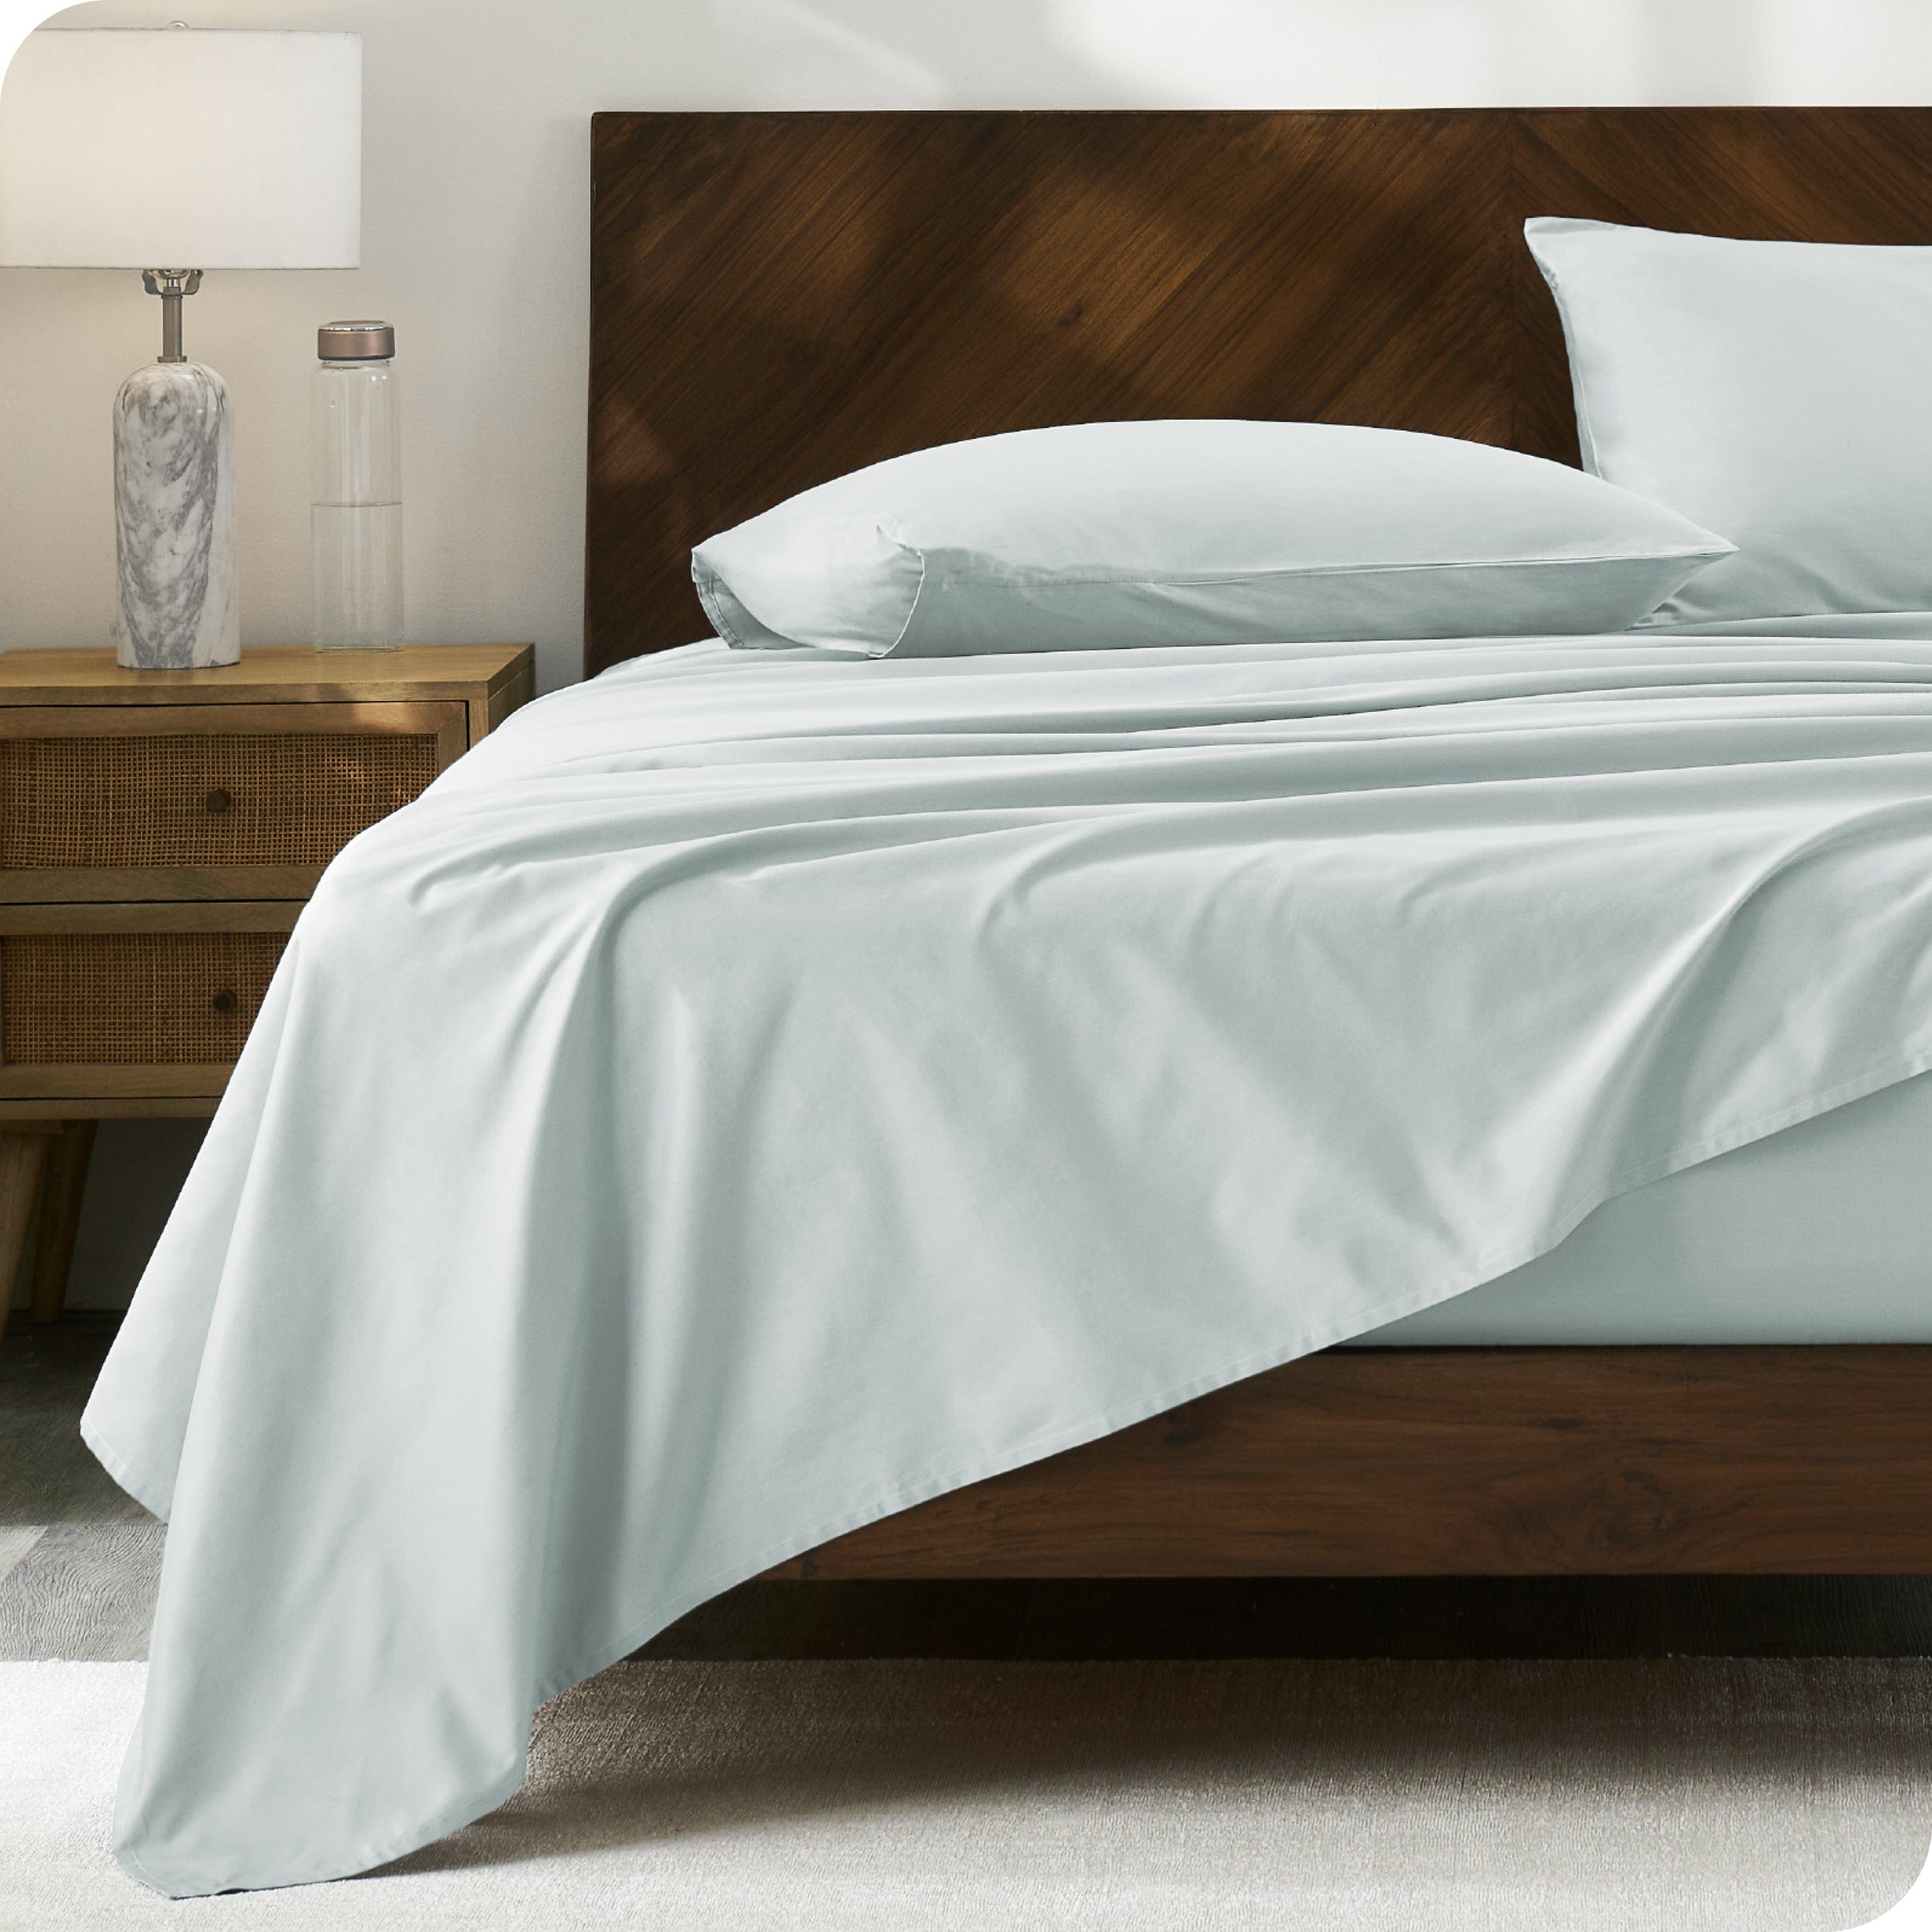 Modern wood bed with percale sheets and pillowcases